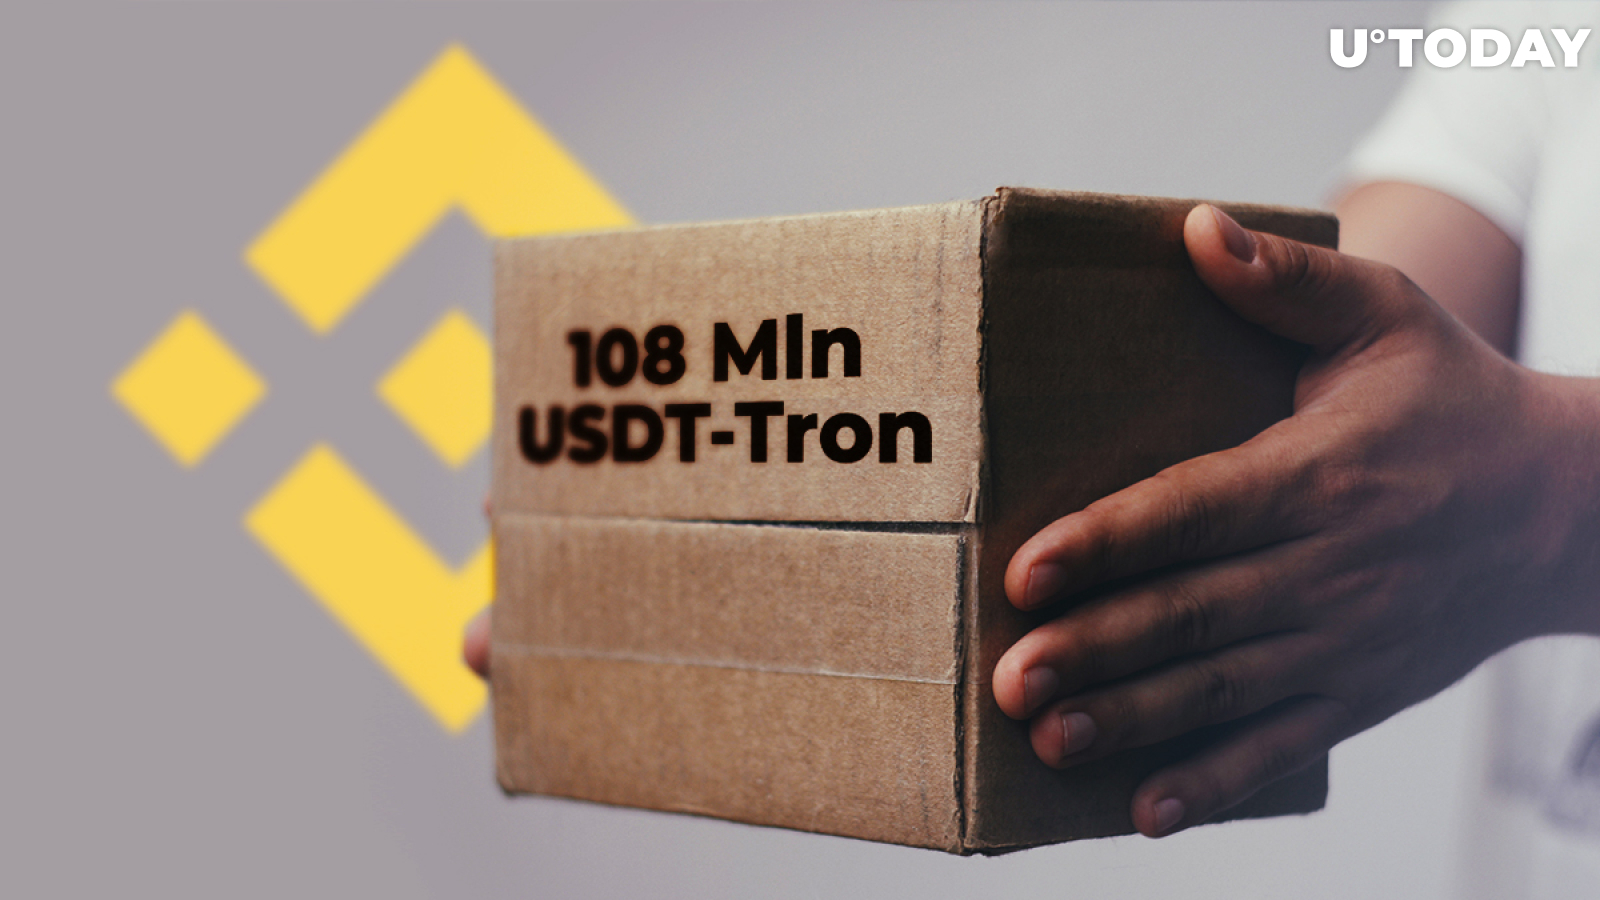 108 Mln USDT-Tron Moved to Binance, While Tether Prints Another 120 Mln USDT